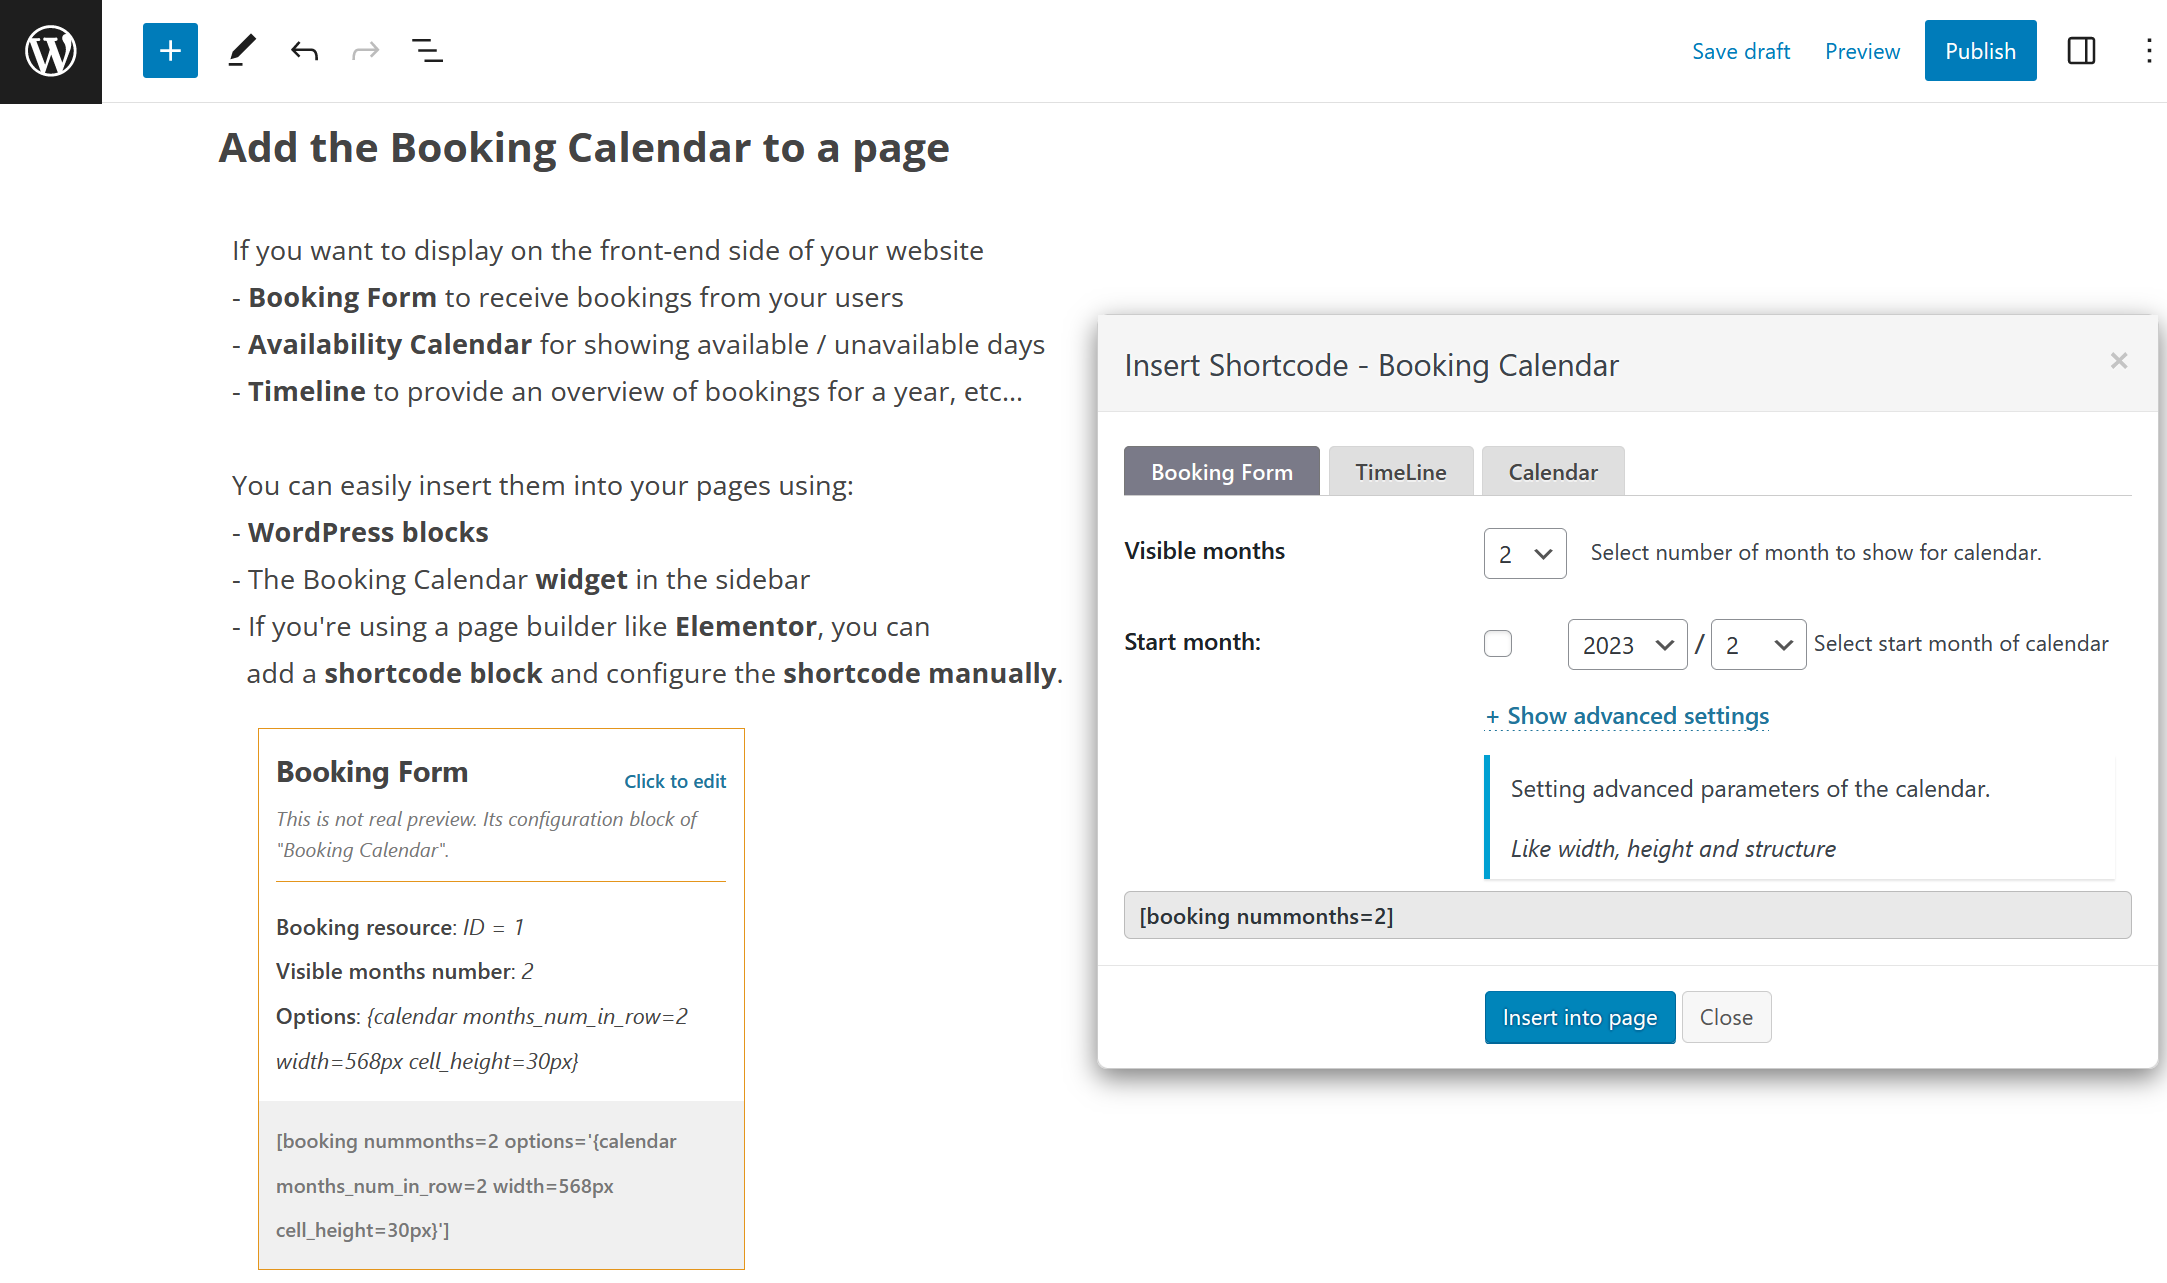 **Insert Booking Calendar to a page**. Easily insert the booking form on any page of your website using WordPress blocks or Booking Calendar widgets for sidebars or configure shortcode block in page builders like Elementor.